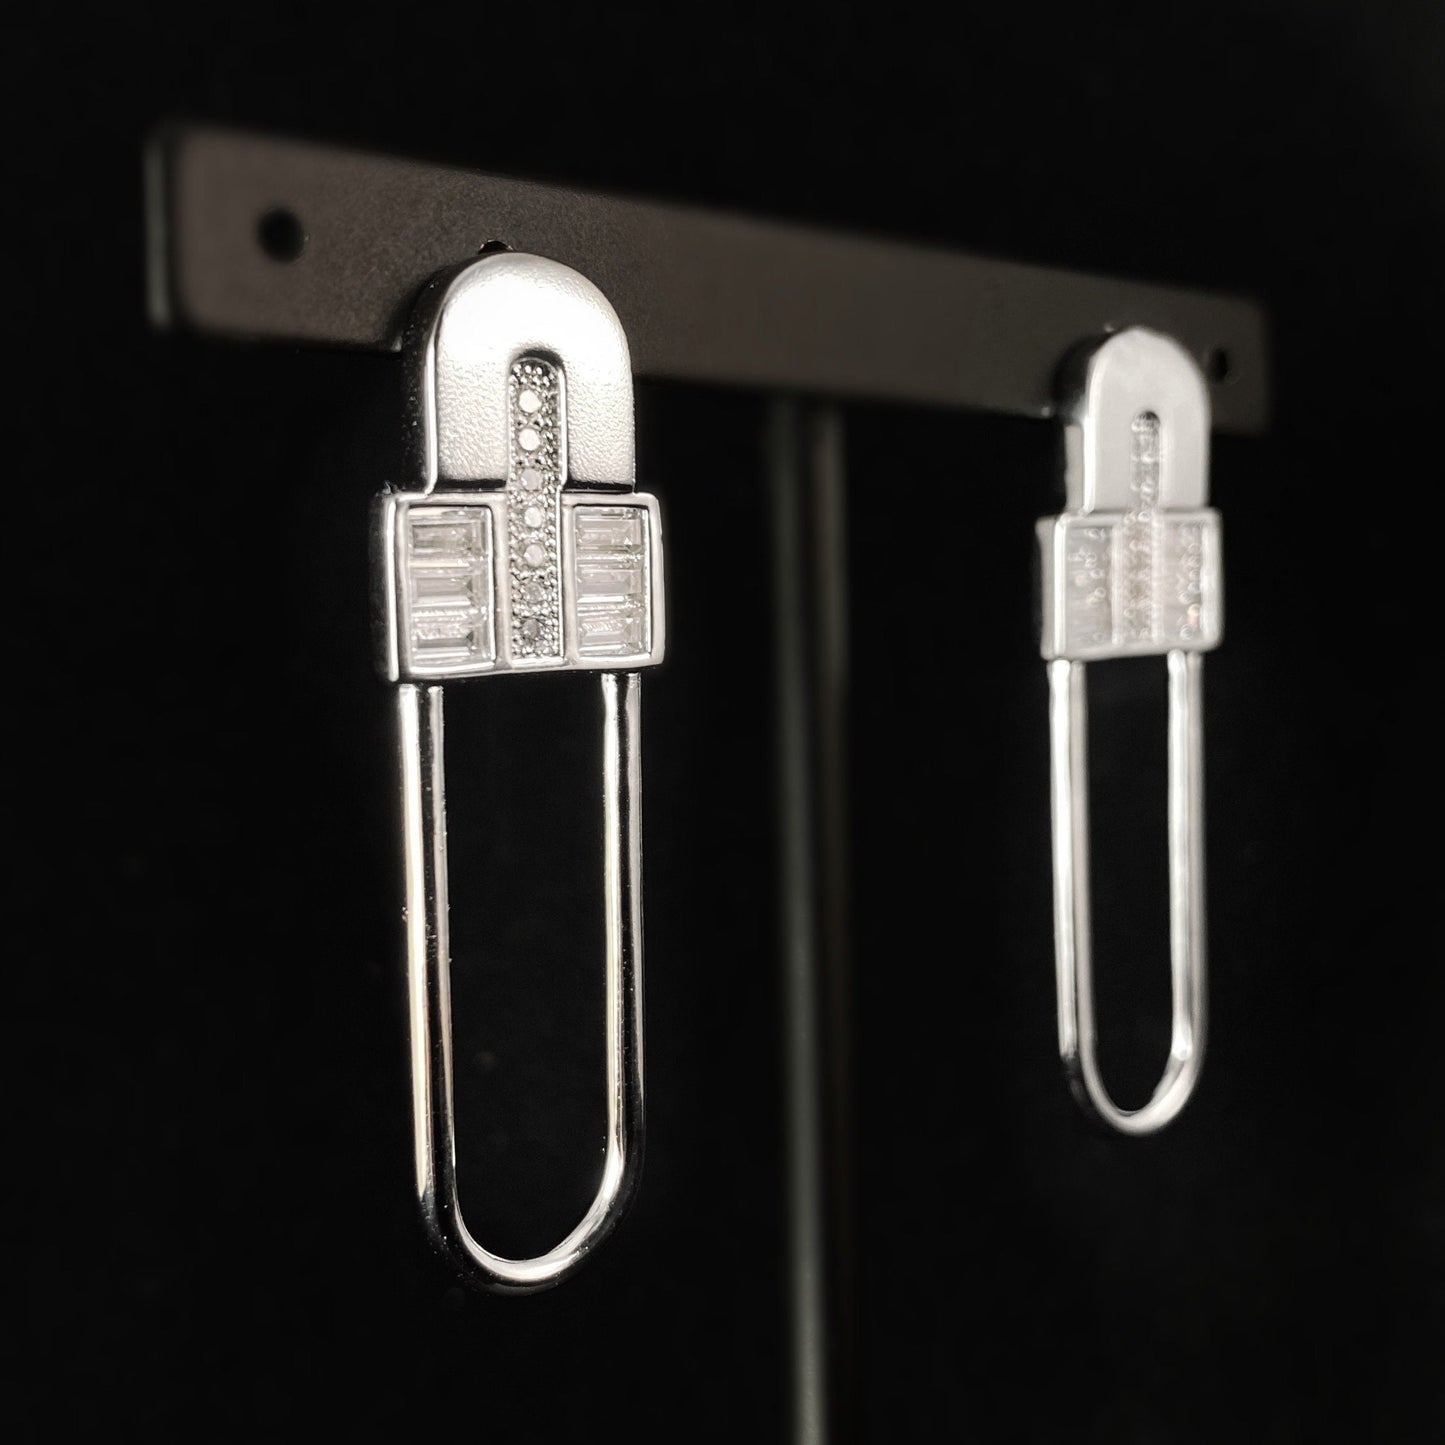 1920s Silver Abstract Safety Pin Earrings with Clear CZ Crystal Accents - Fashionable Jewelry for Women